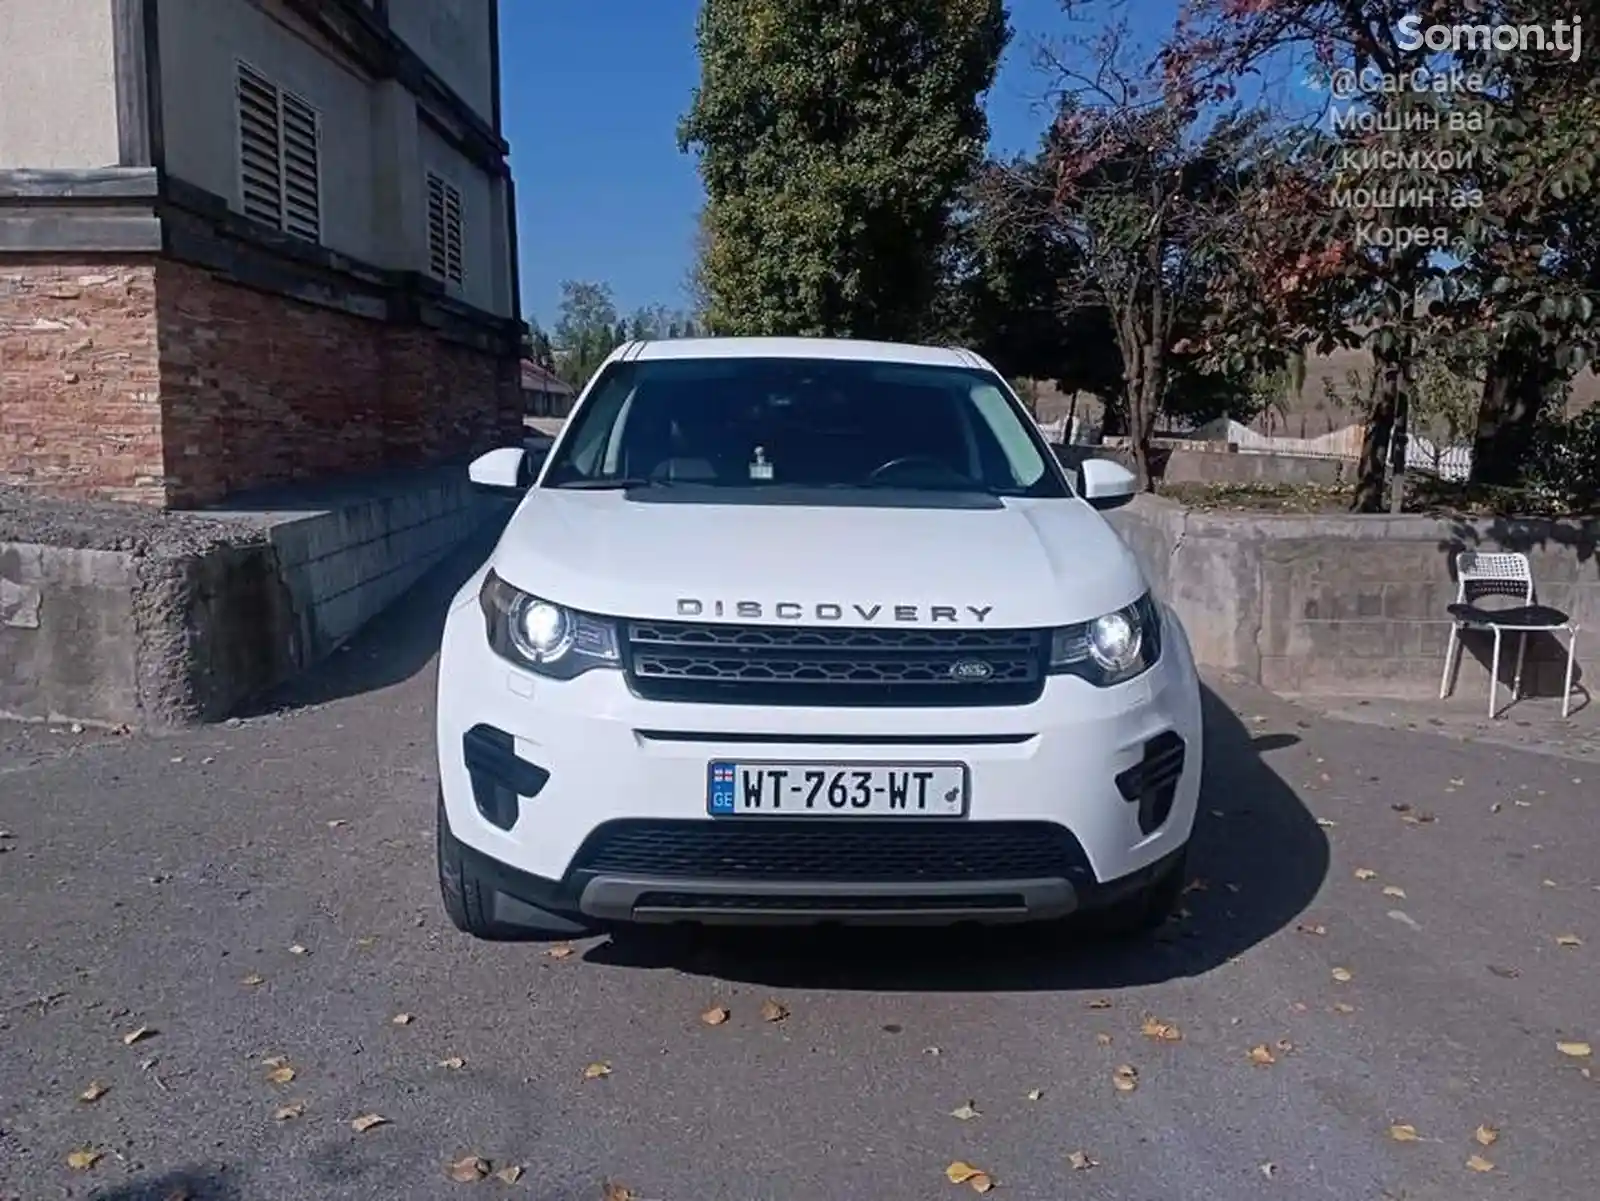 Land Rover Discovery, 2016-11